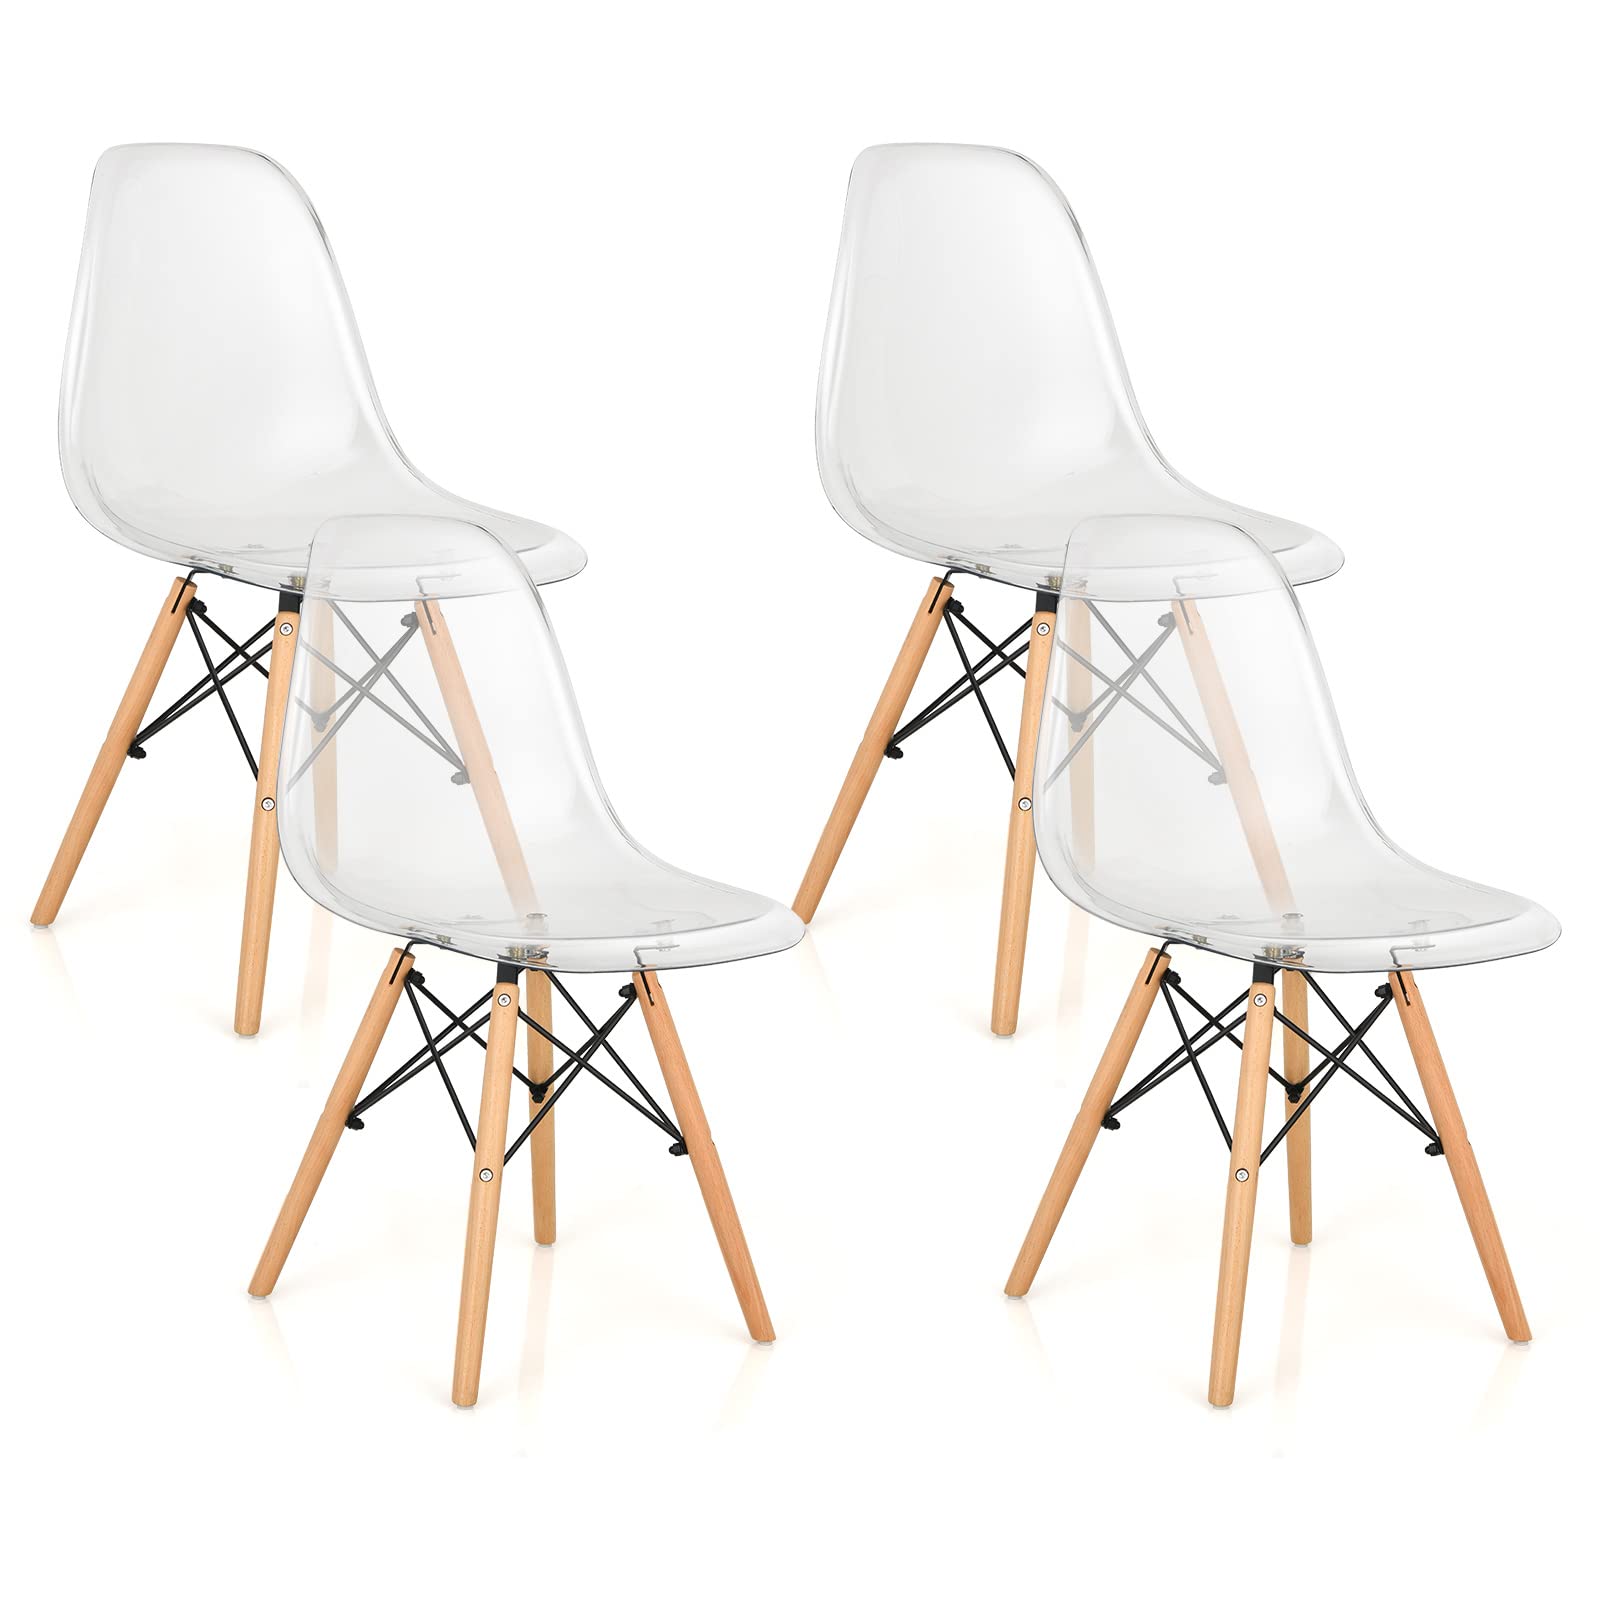 Giantex Set of 4 Dining Chairs, Clear Dining Side Chairs w/Beech Wood Legs